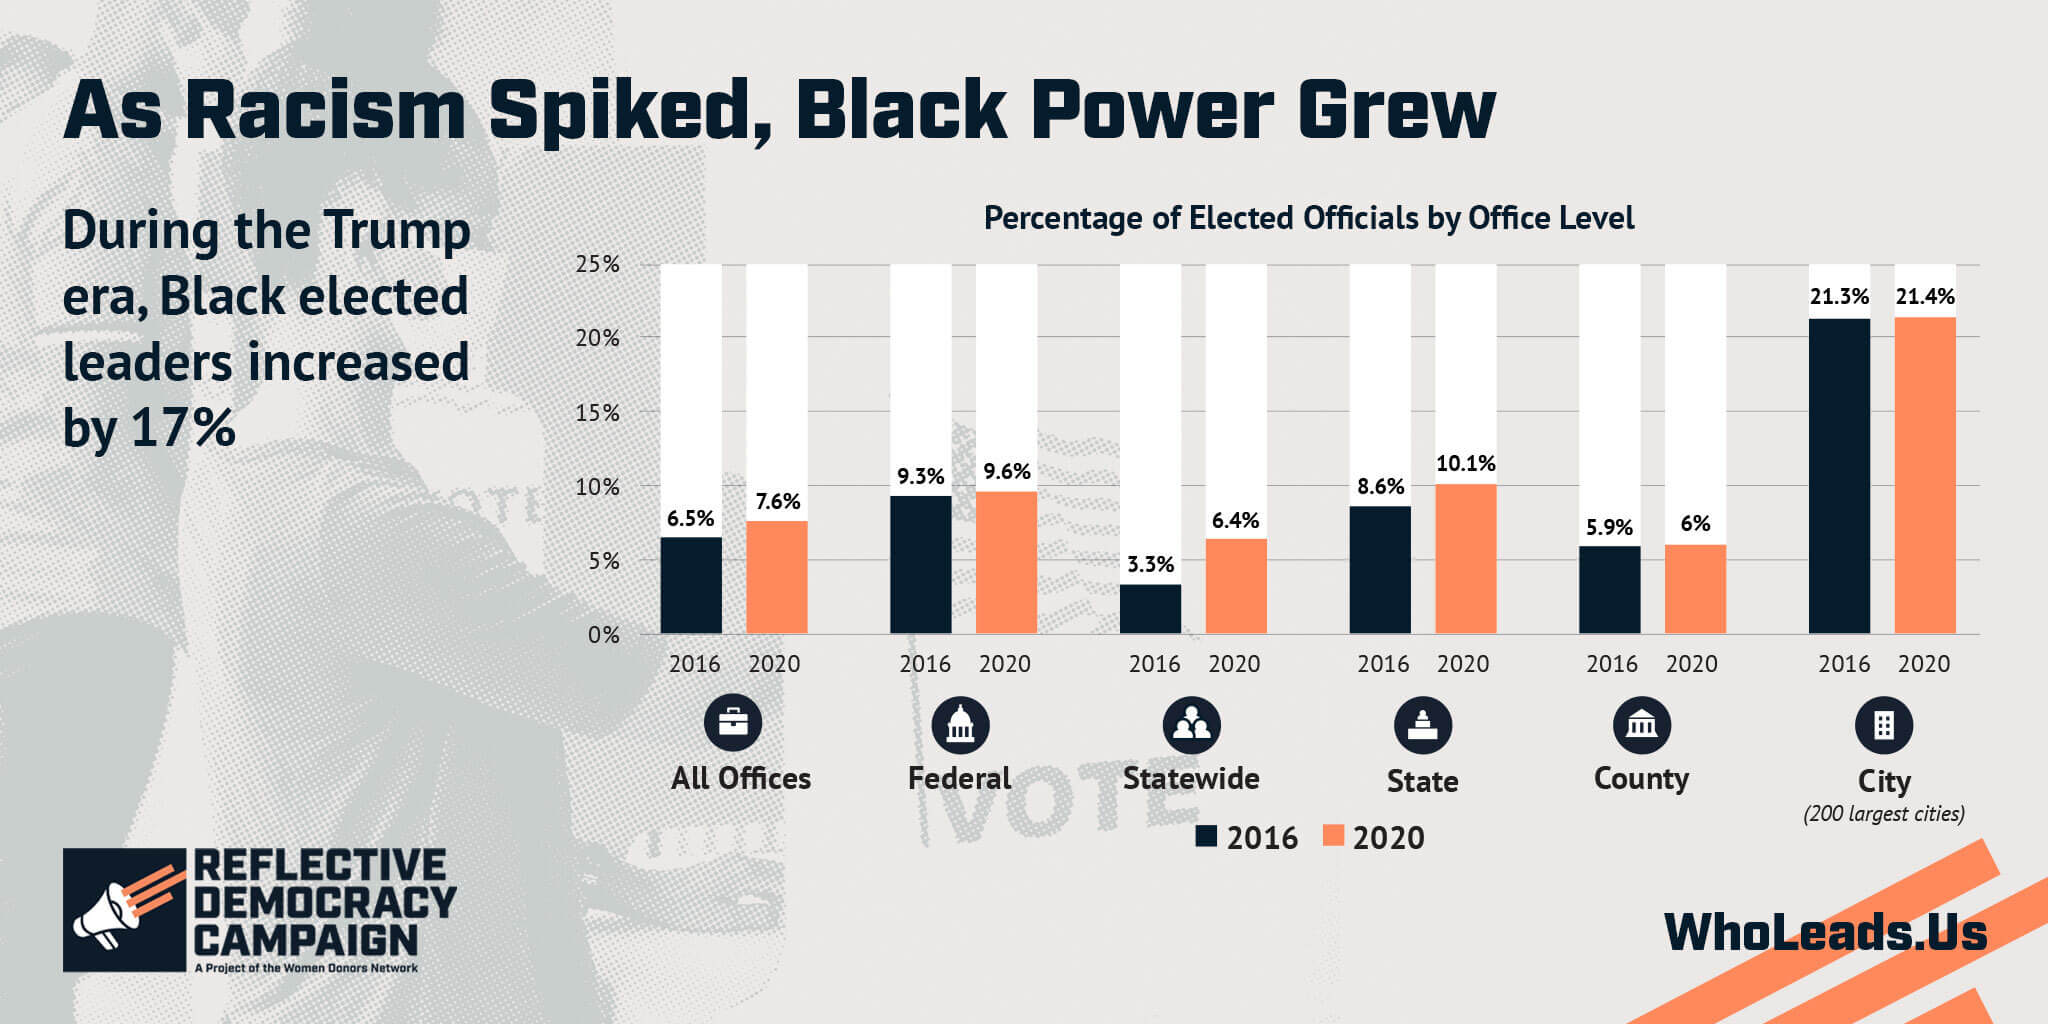 Chart showing that during the Trump era, Black elected leaders increased 17%